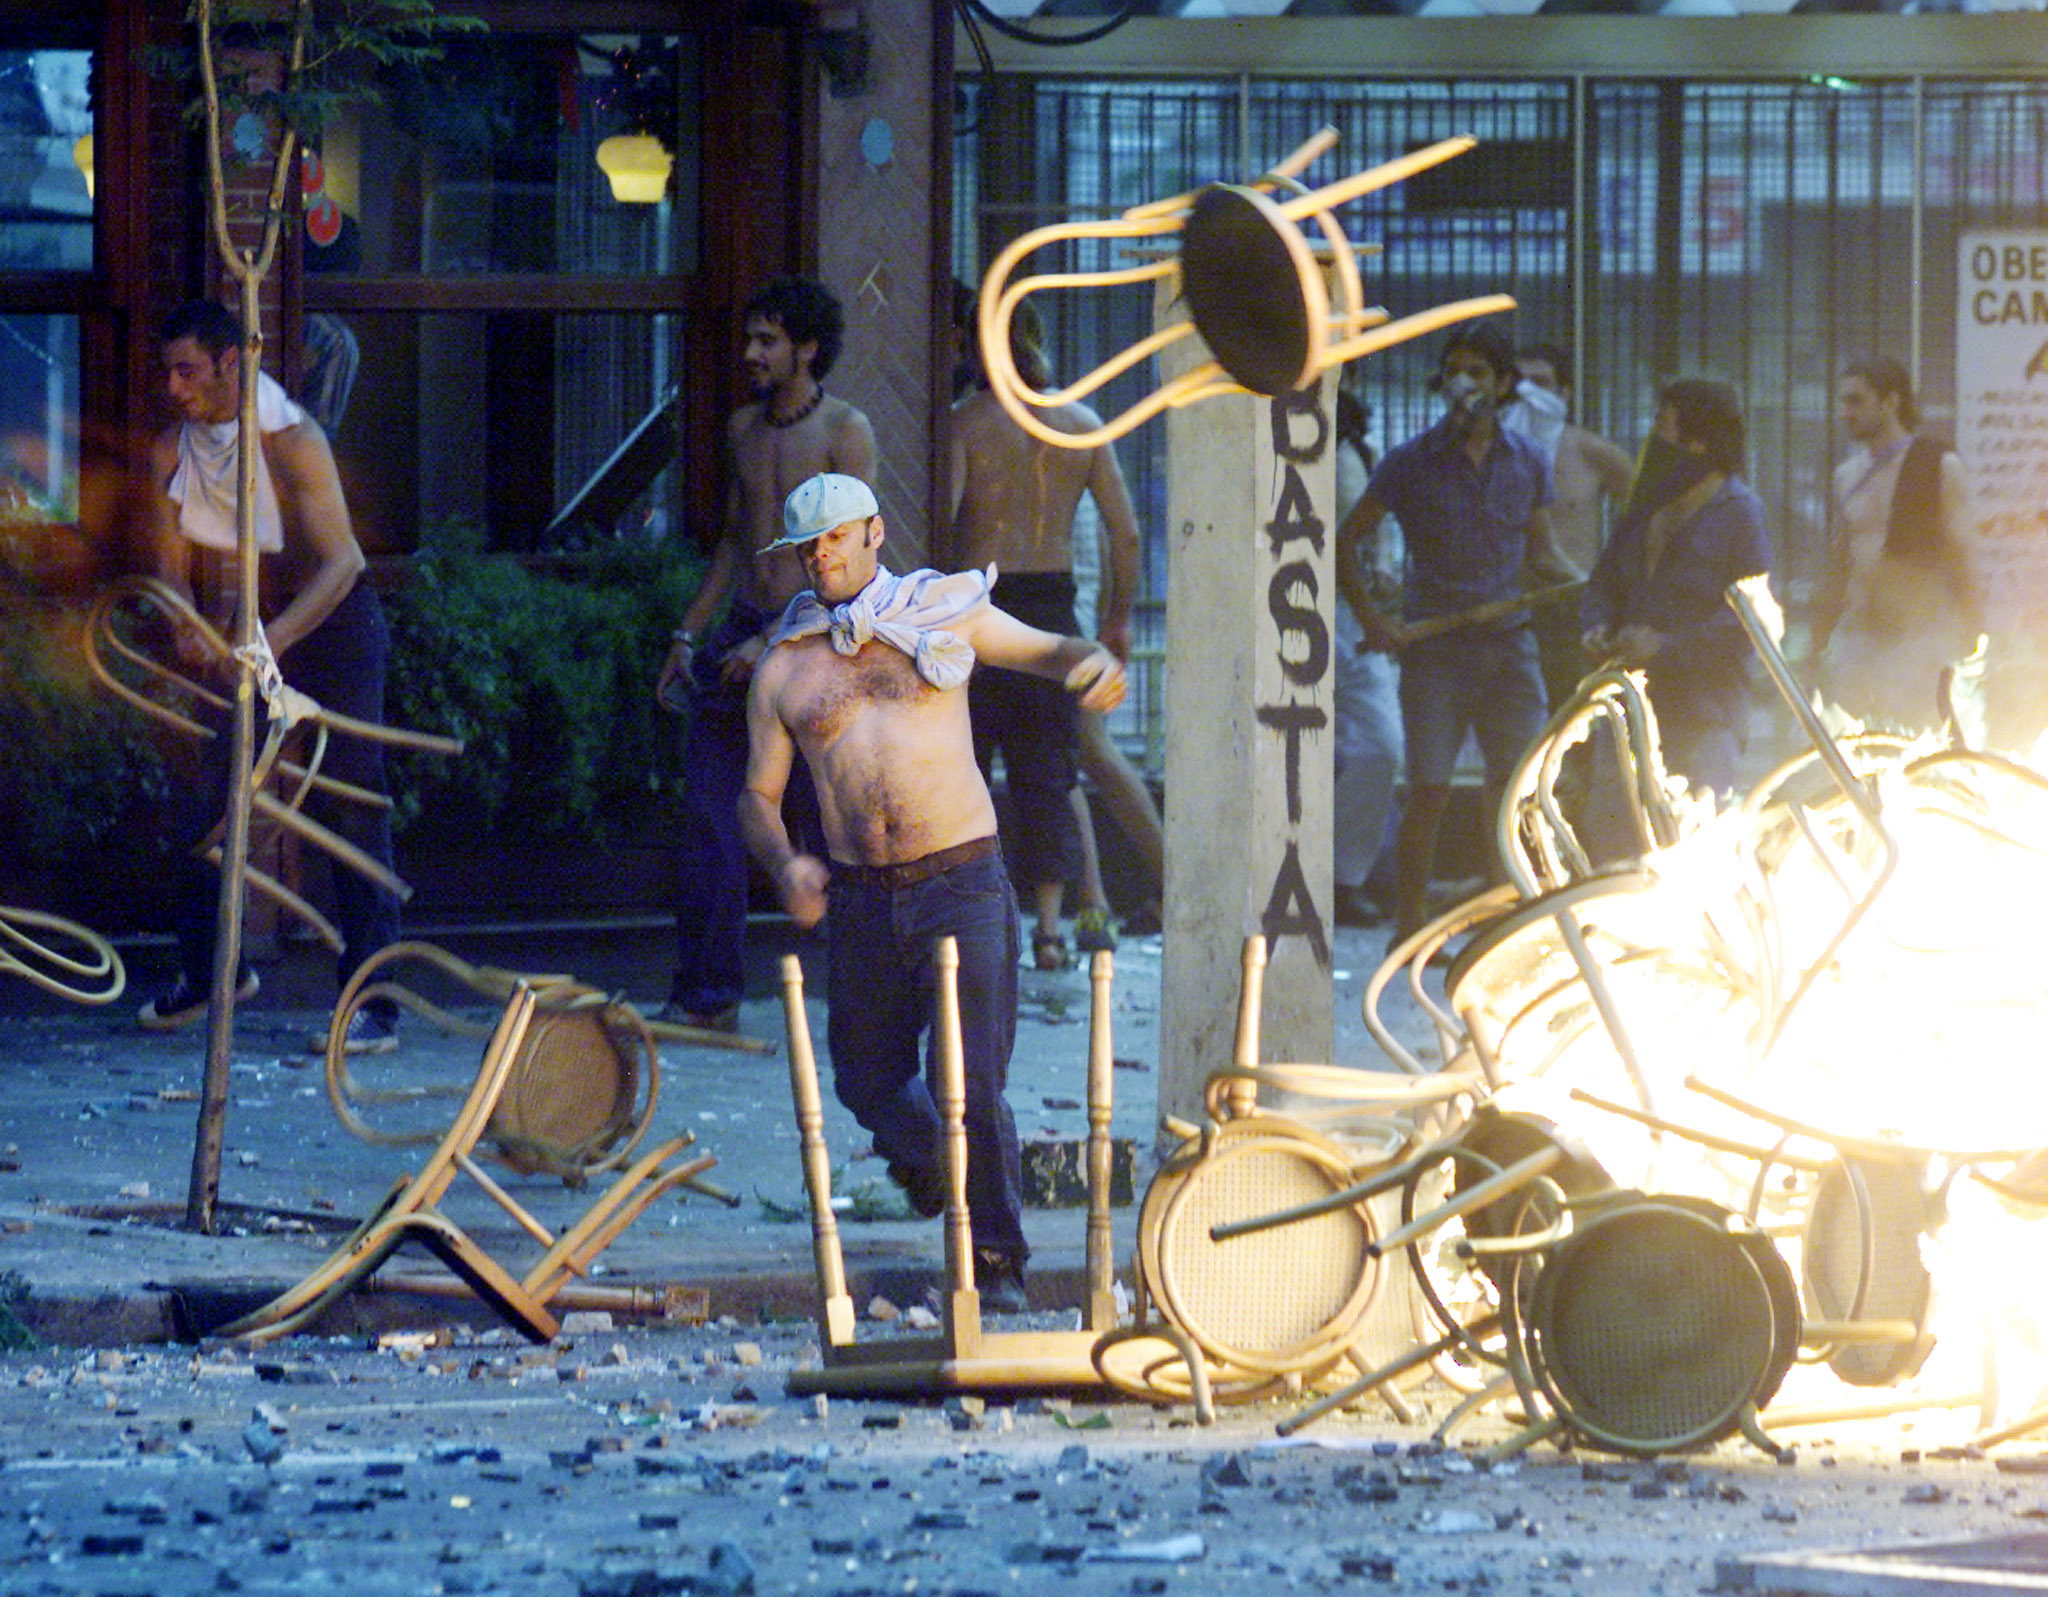 Rioters create a bonfire to use as a barricade during clashes in the city's financial district in Buenos Aires on December 20, 2001. [Argentine President Fernando de la Rua stepped down after thousands of protesters gathered at the Plaza de Mayo square, demanding his resignation.] At least five people died and dozens were seriously injured in the clashes. - RTXKY0J